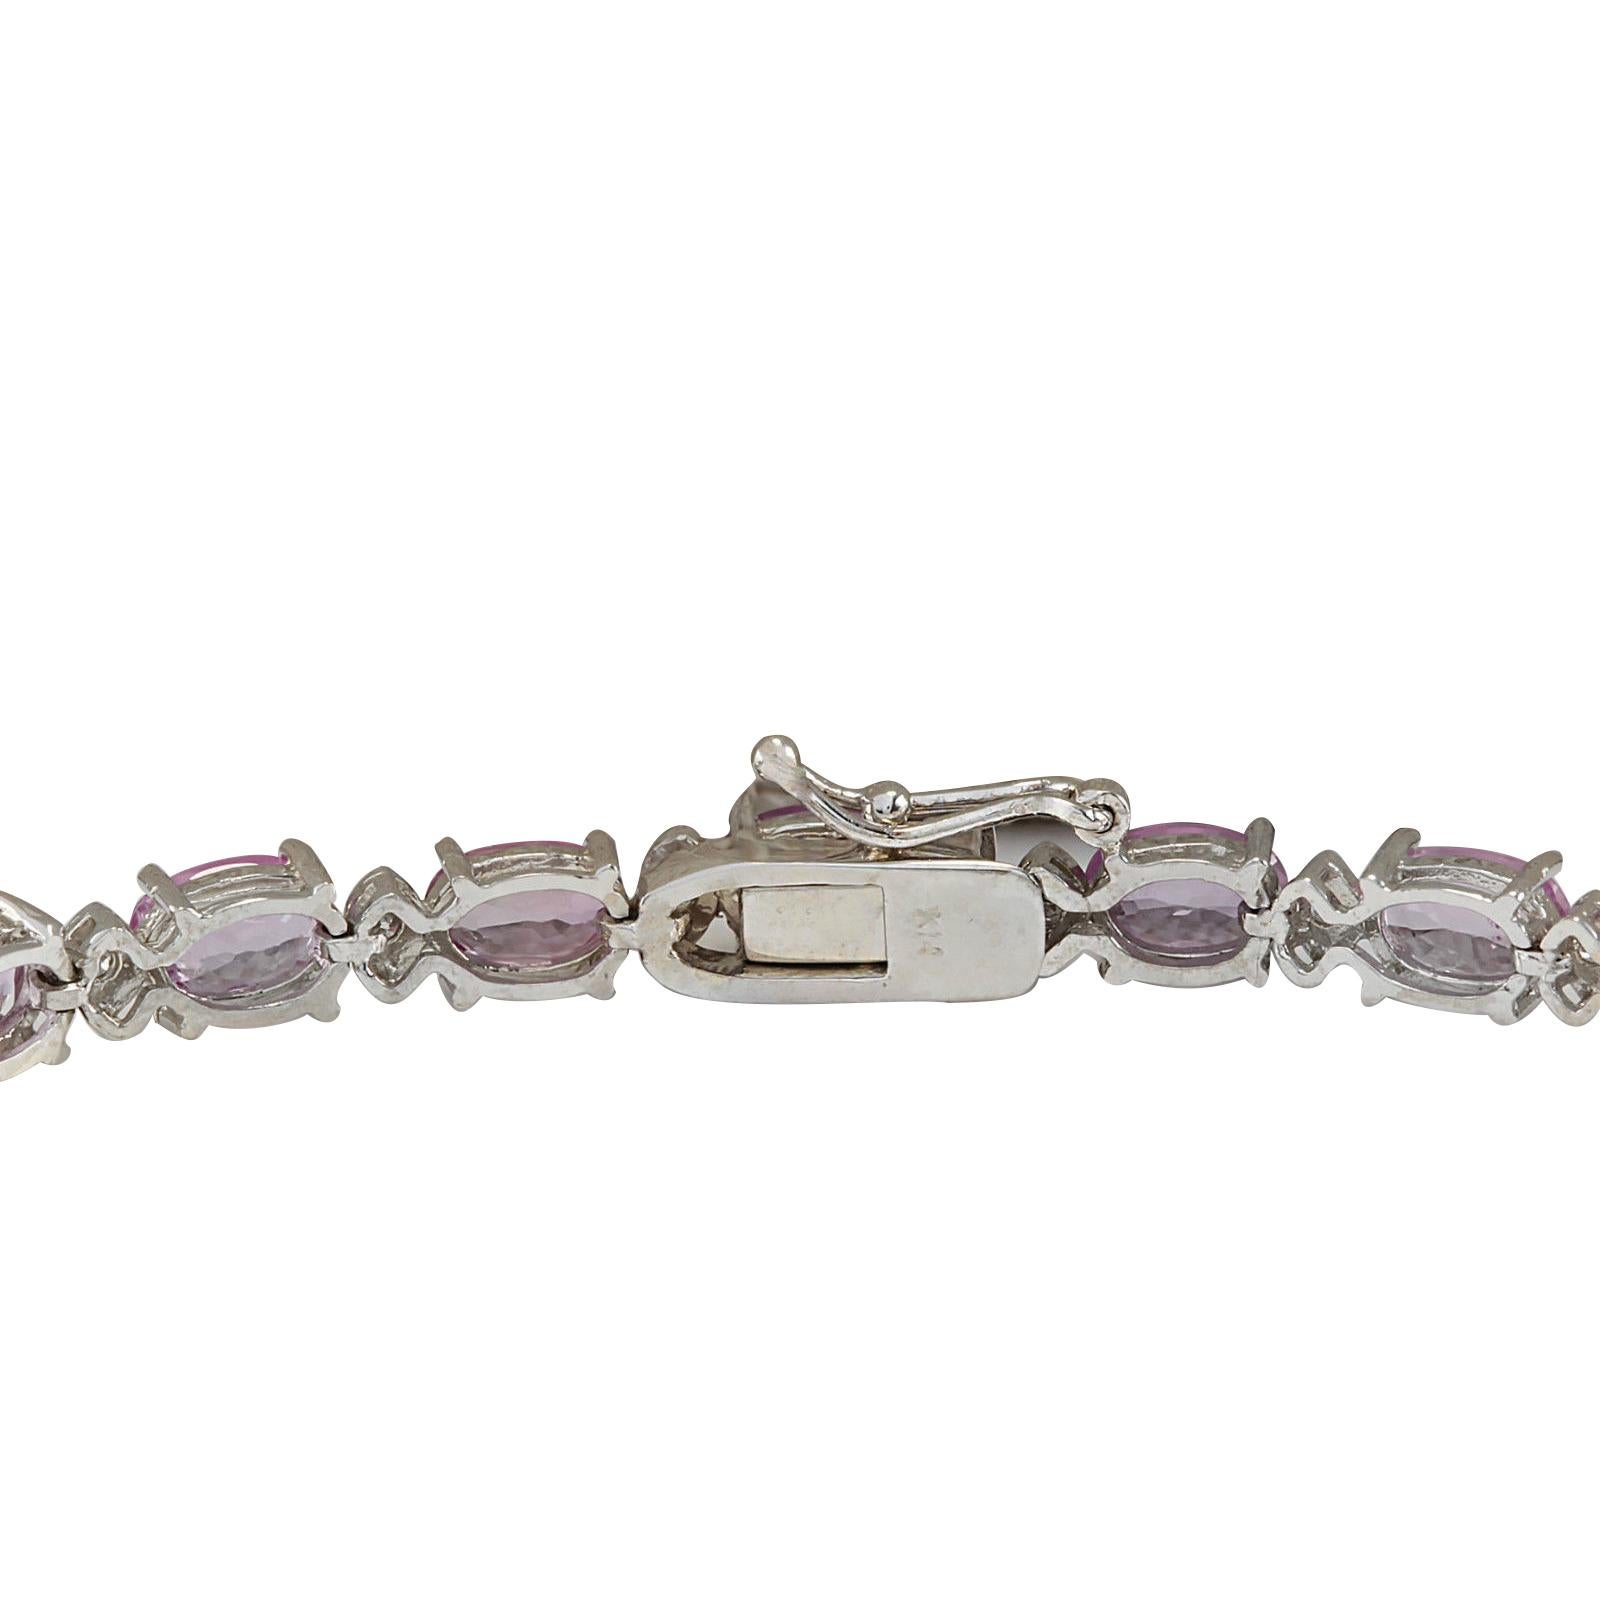 Stamped: 14K White Gold
Total Bracelet Weight: 9.0 Grams
Bracelet Length: 7 Inches
Bracelet Width: 4.00 mm
Total Natural Sapphire Weight is 13.50 Carat
Color: Pink
Total Natural Diamond Weight is 0.60 Carat
Color: F-G, Clarity: VS2-SI1
Face